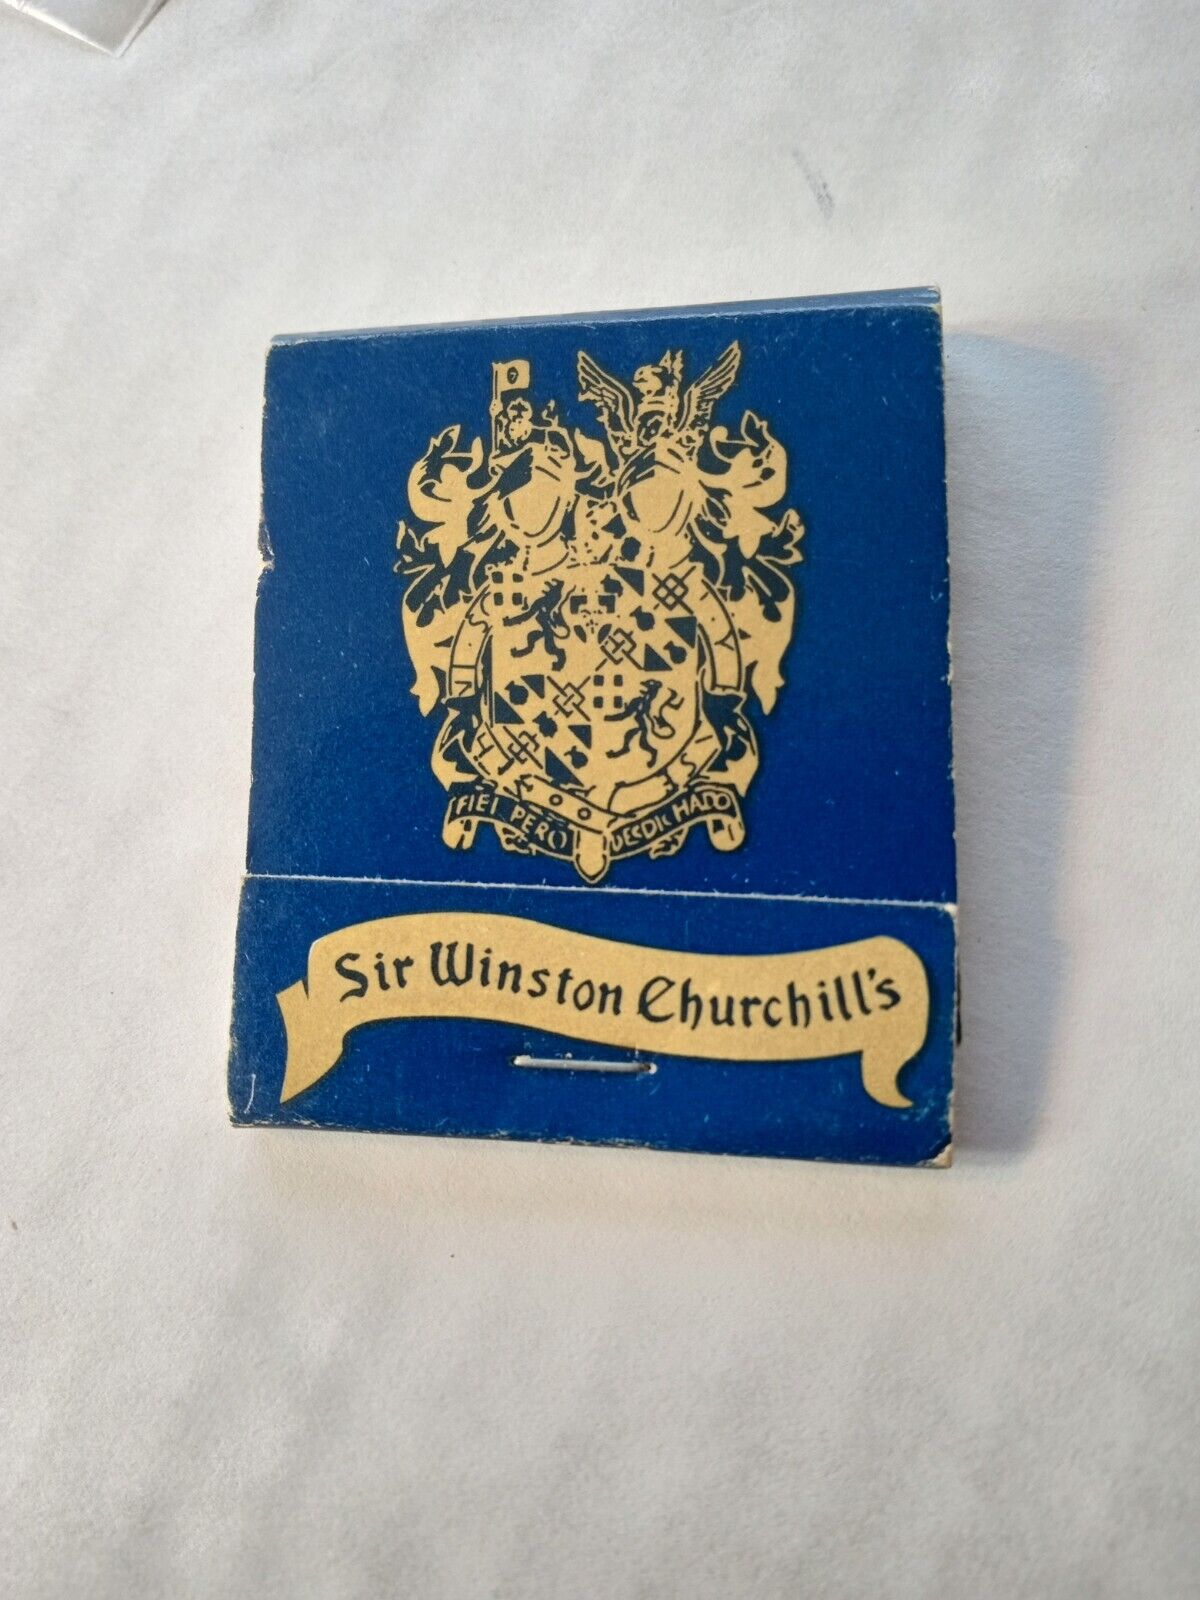 Sir Winston Churchill's Aboard The Queen Mary Matchbook